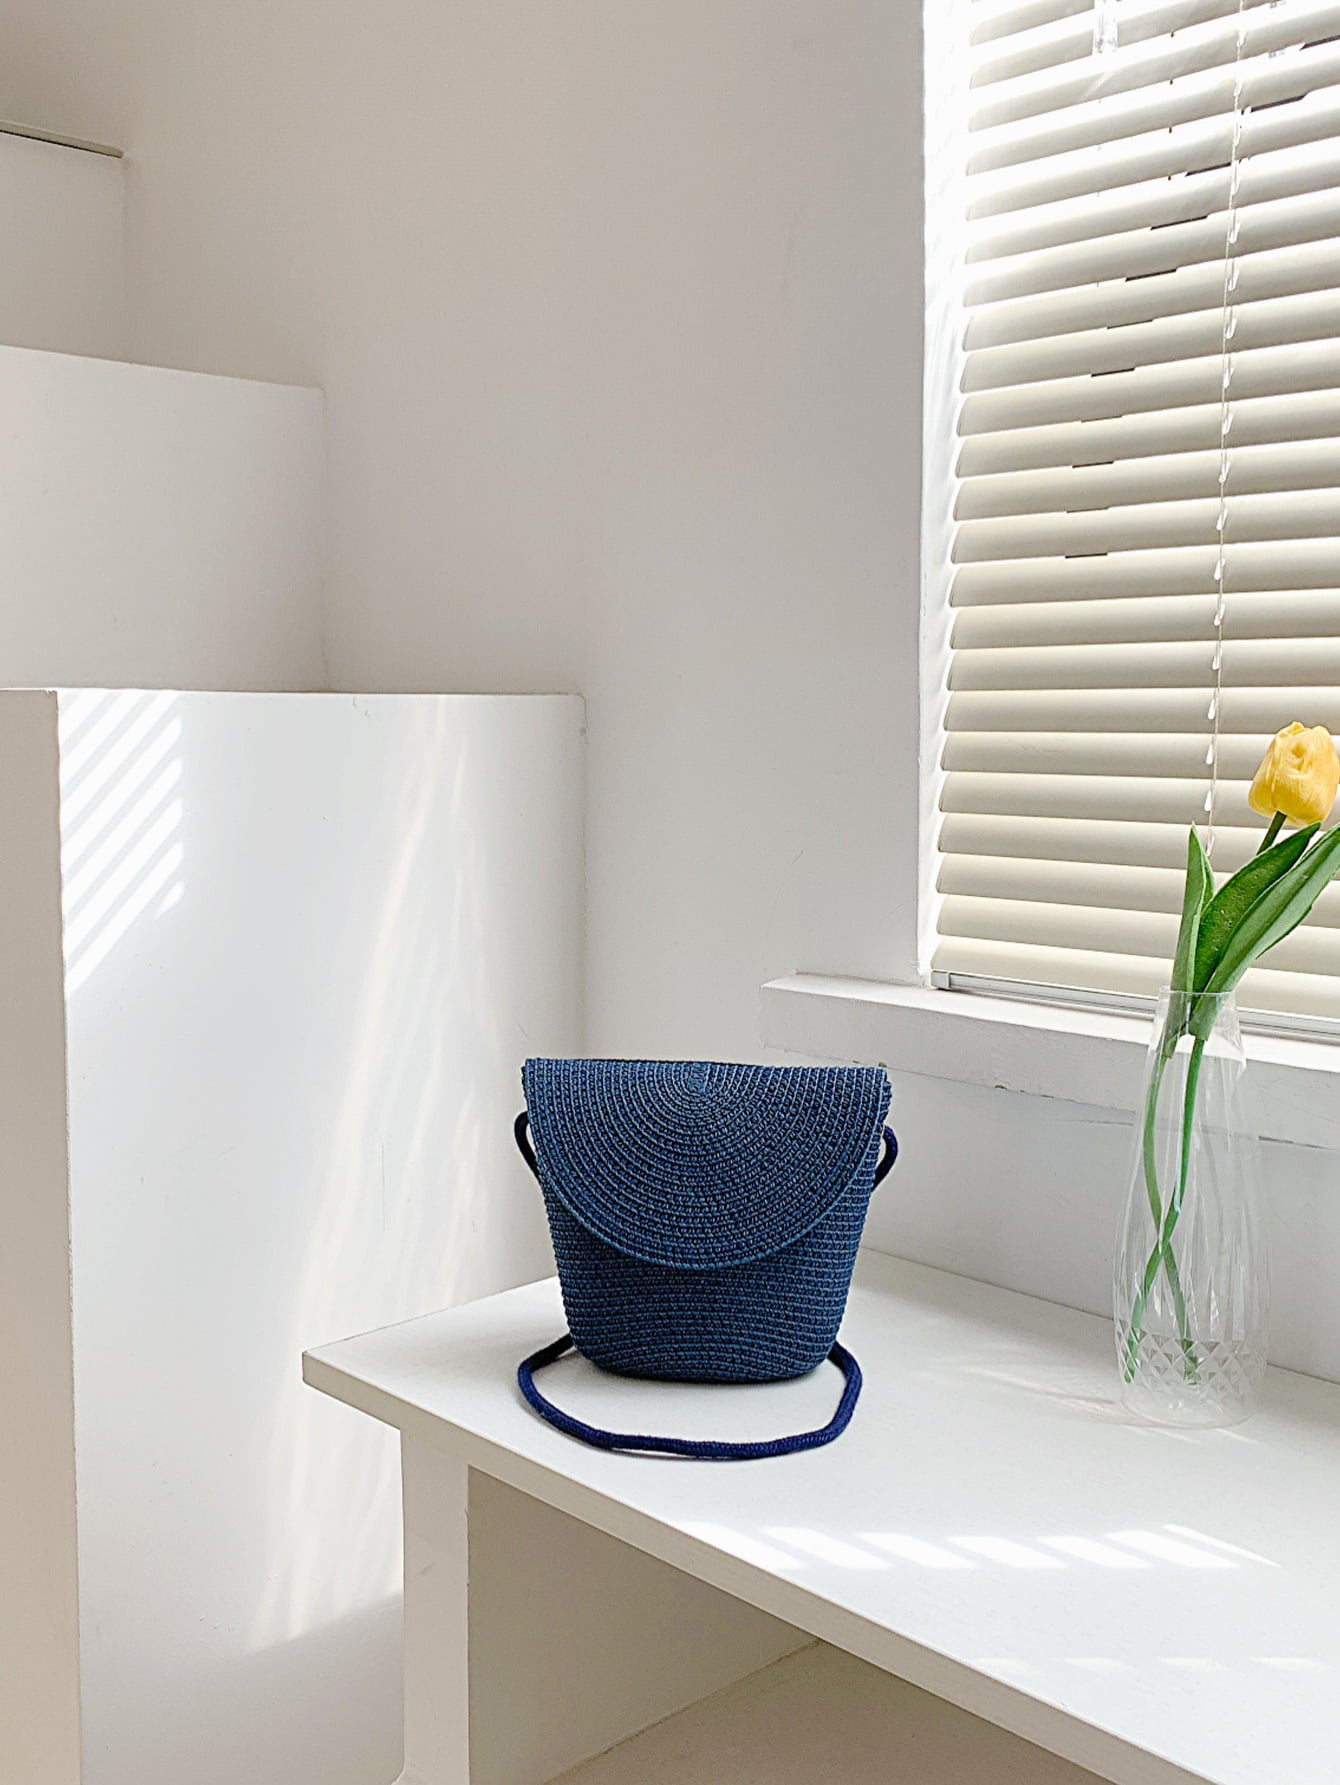 crochet shoulder handbag, angled view, on white countertop against window with white window blinds